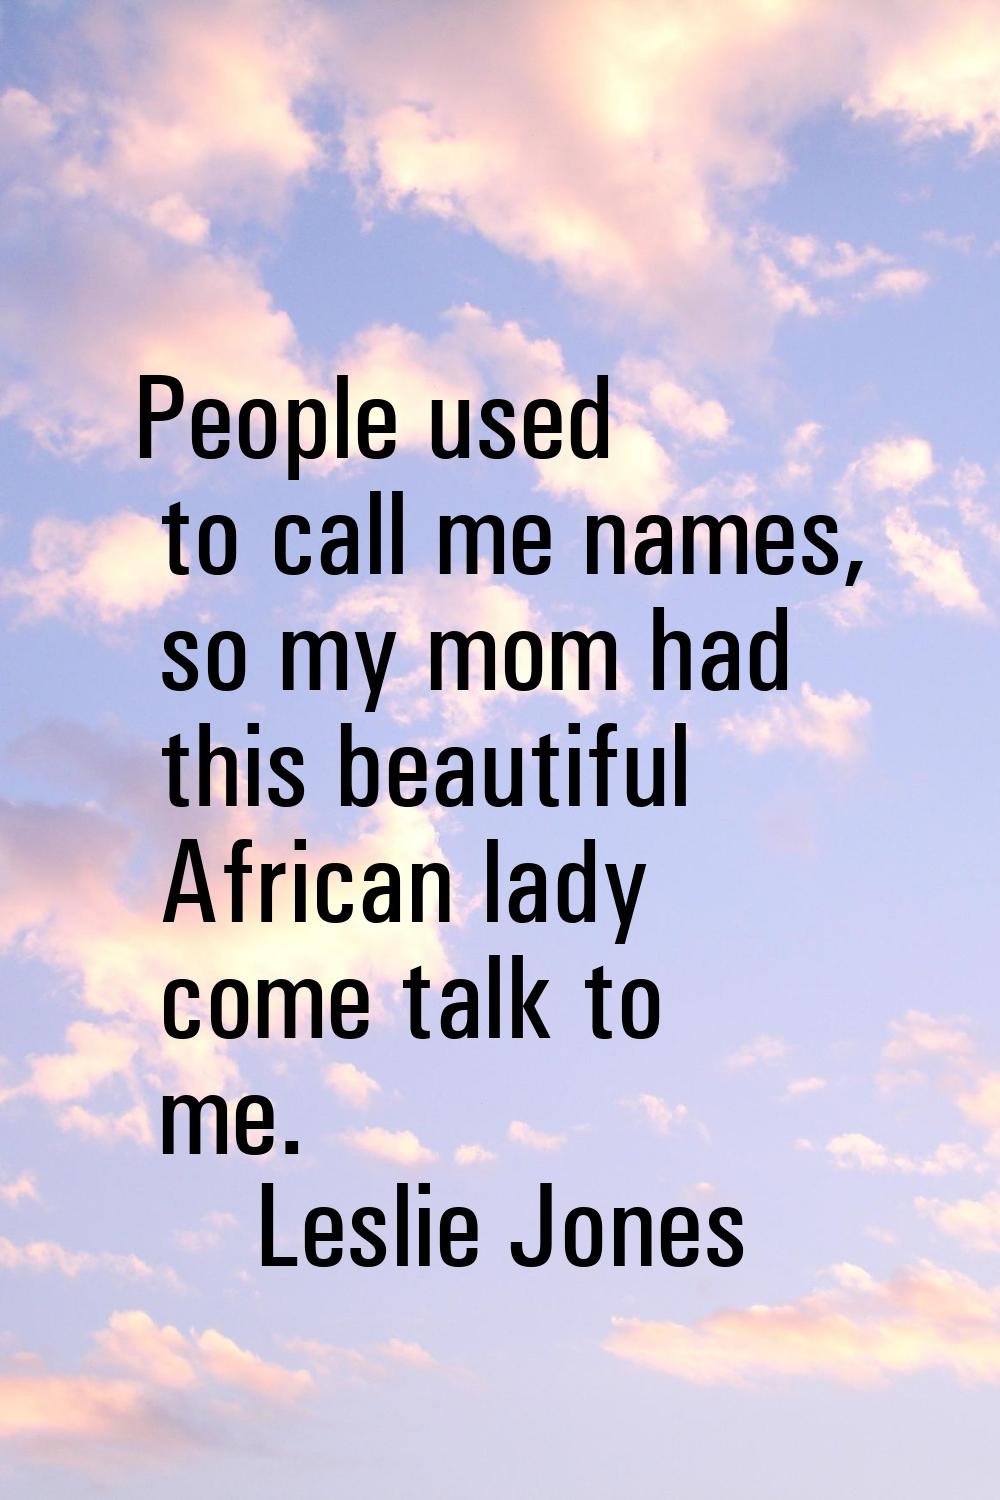 People used to call me names, so my mom had this beautiful African lady come talk to me.